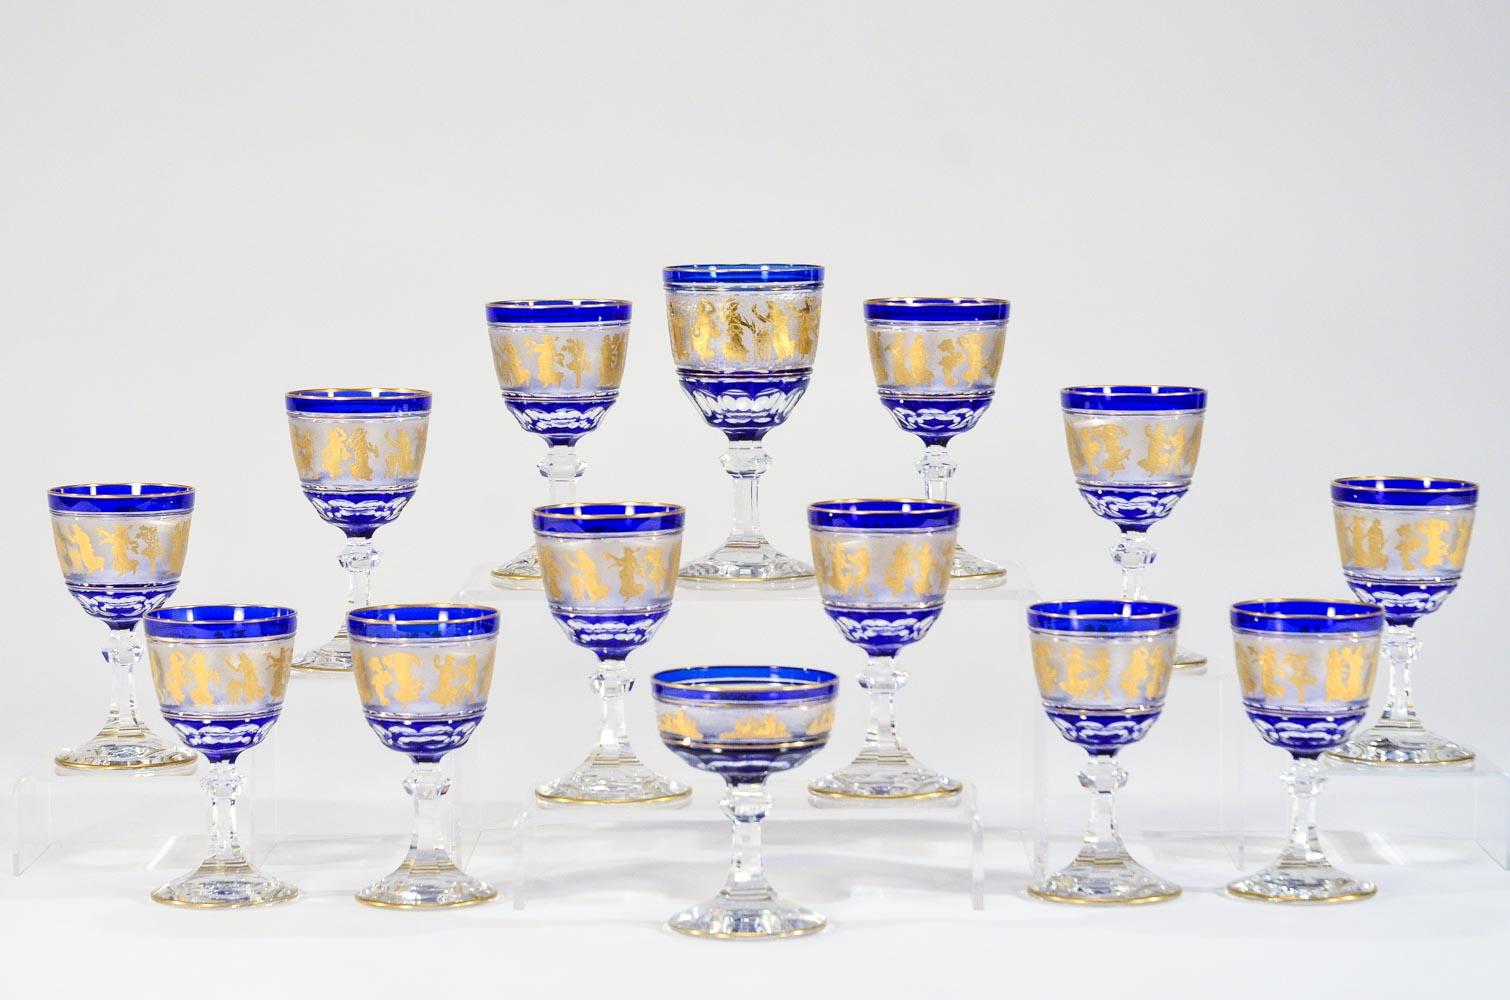 This is a magnificent set of 12 rare sized wine goblets made by Val St. Lambert. Each one is hand blown with cobalt crystal overlay, cut to clear with cameo cut frieze of Roman figures embellished with gold leaf. This pattern is one of Val St.